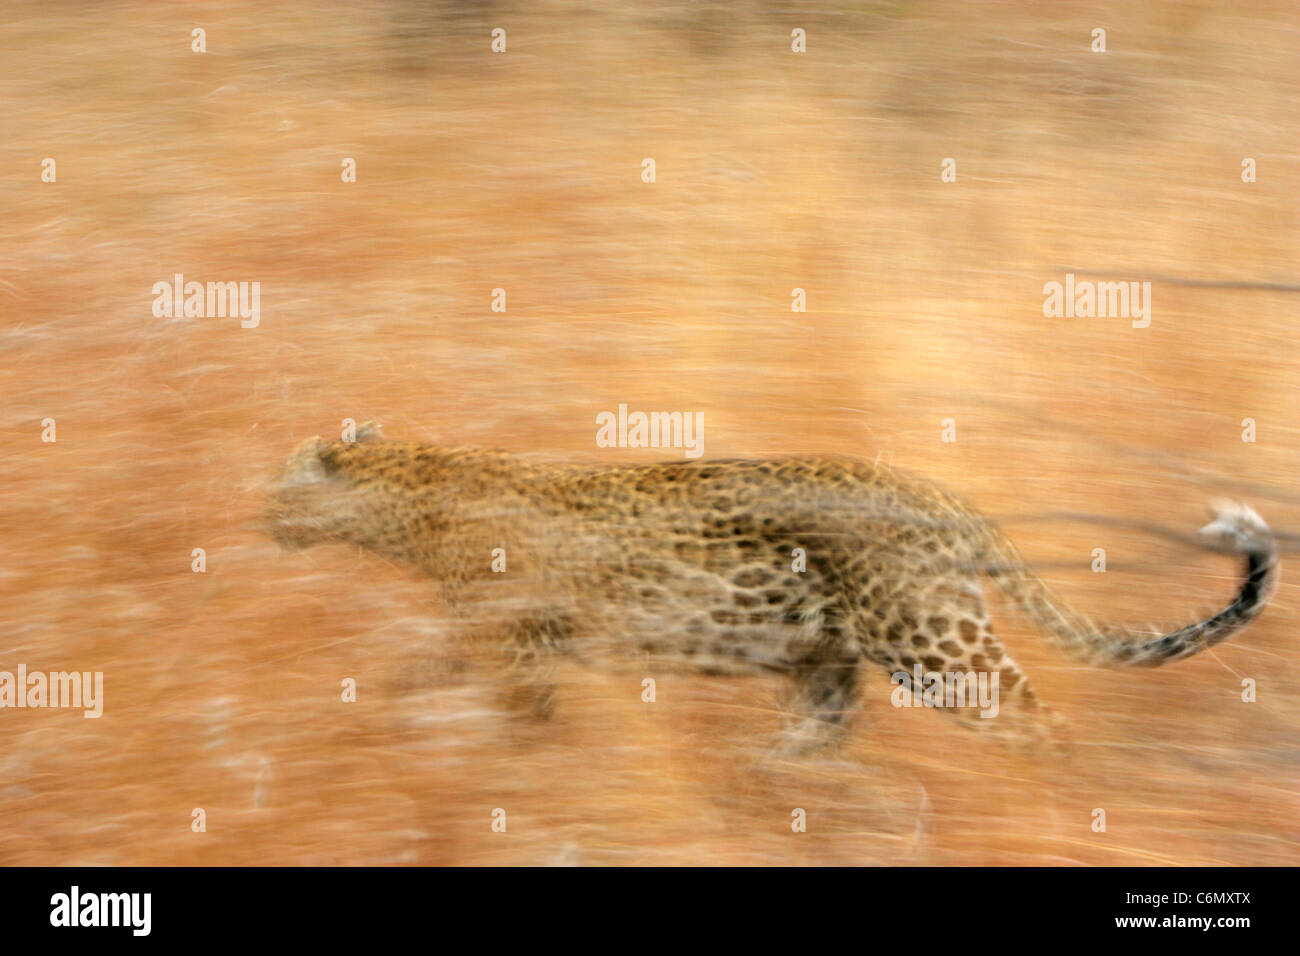 Abstract image of a Leopard running Stock Photo